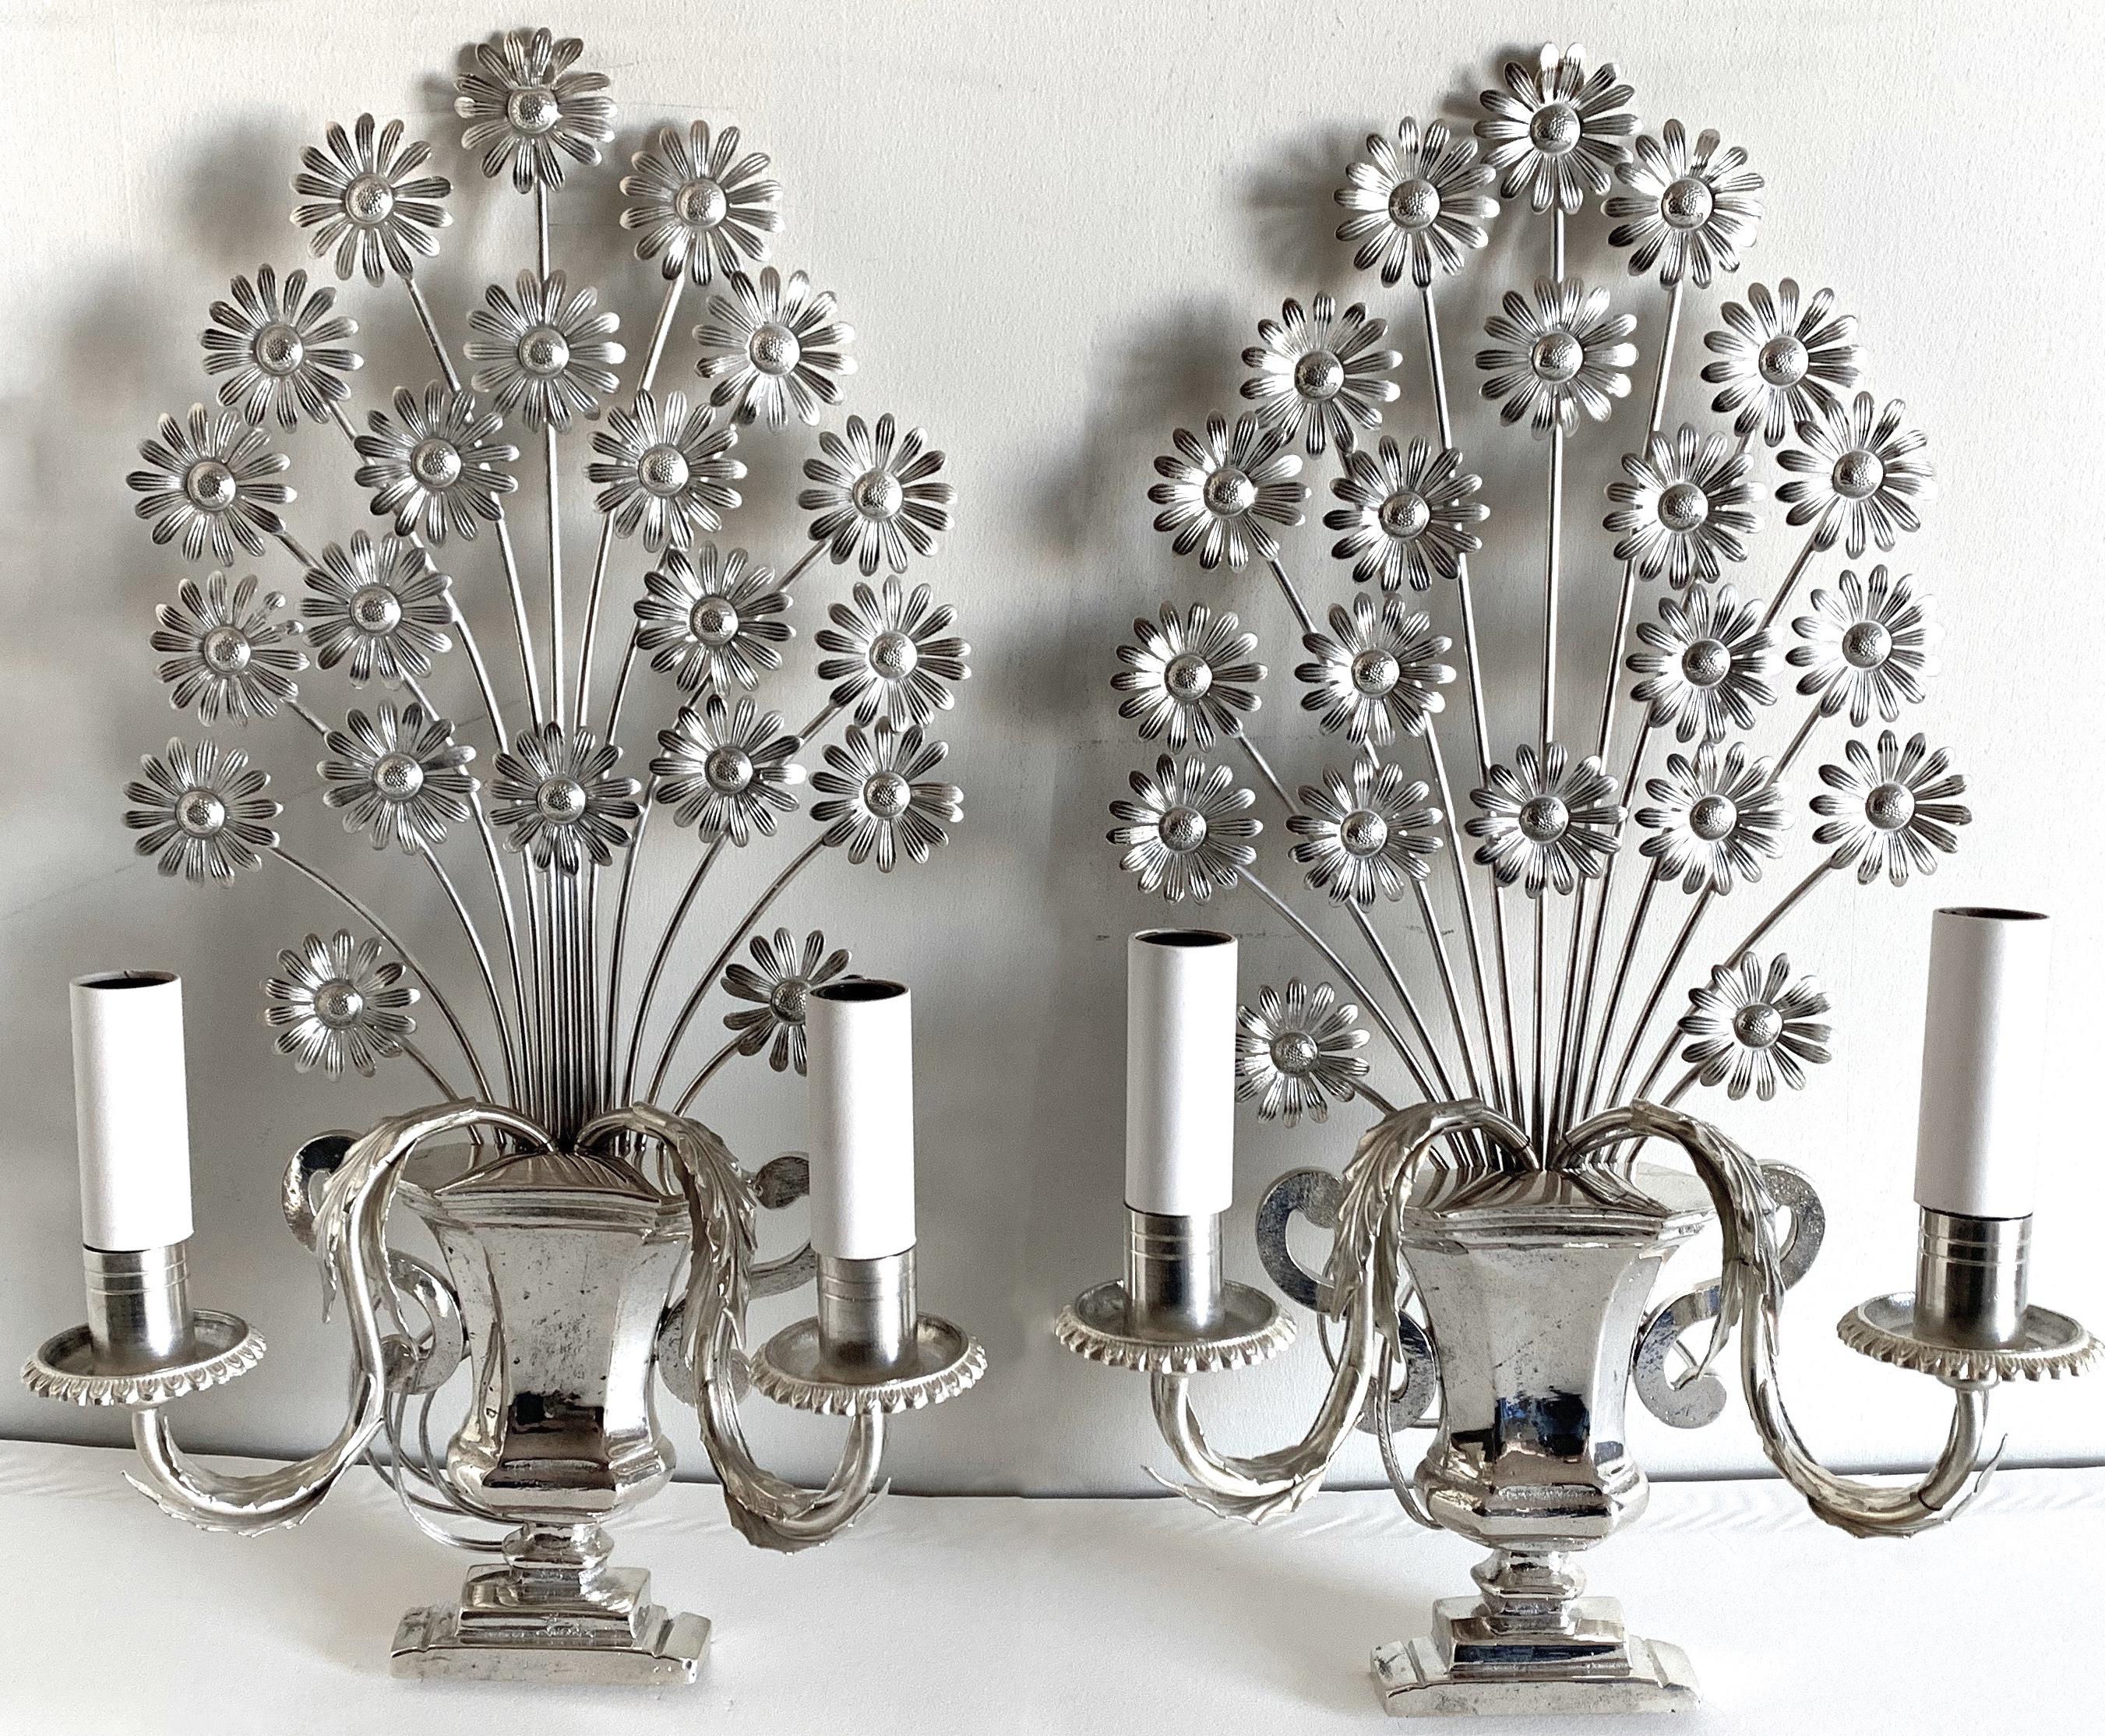 Pair of 1950s French metal flower sconces. Newly silver plated and polished. Newly rewired. Each light takes two chandelier bulbs (not included).
Please note that additional components such as back plates may be required for installation and are